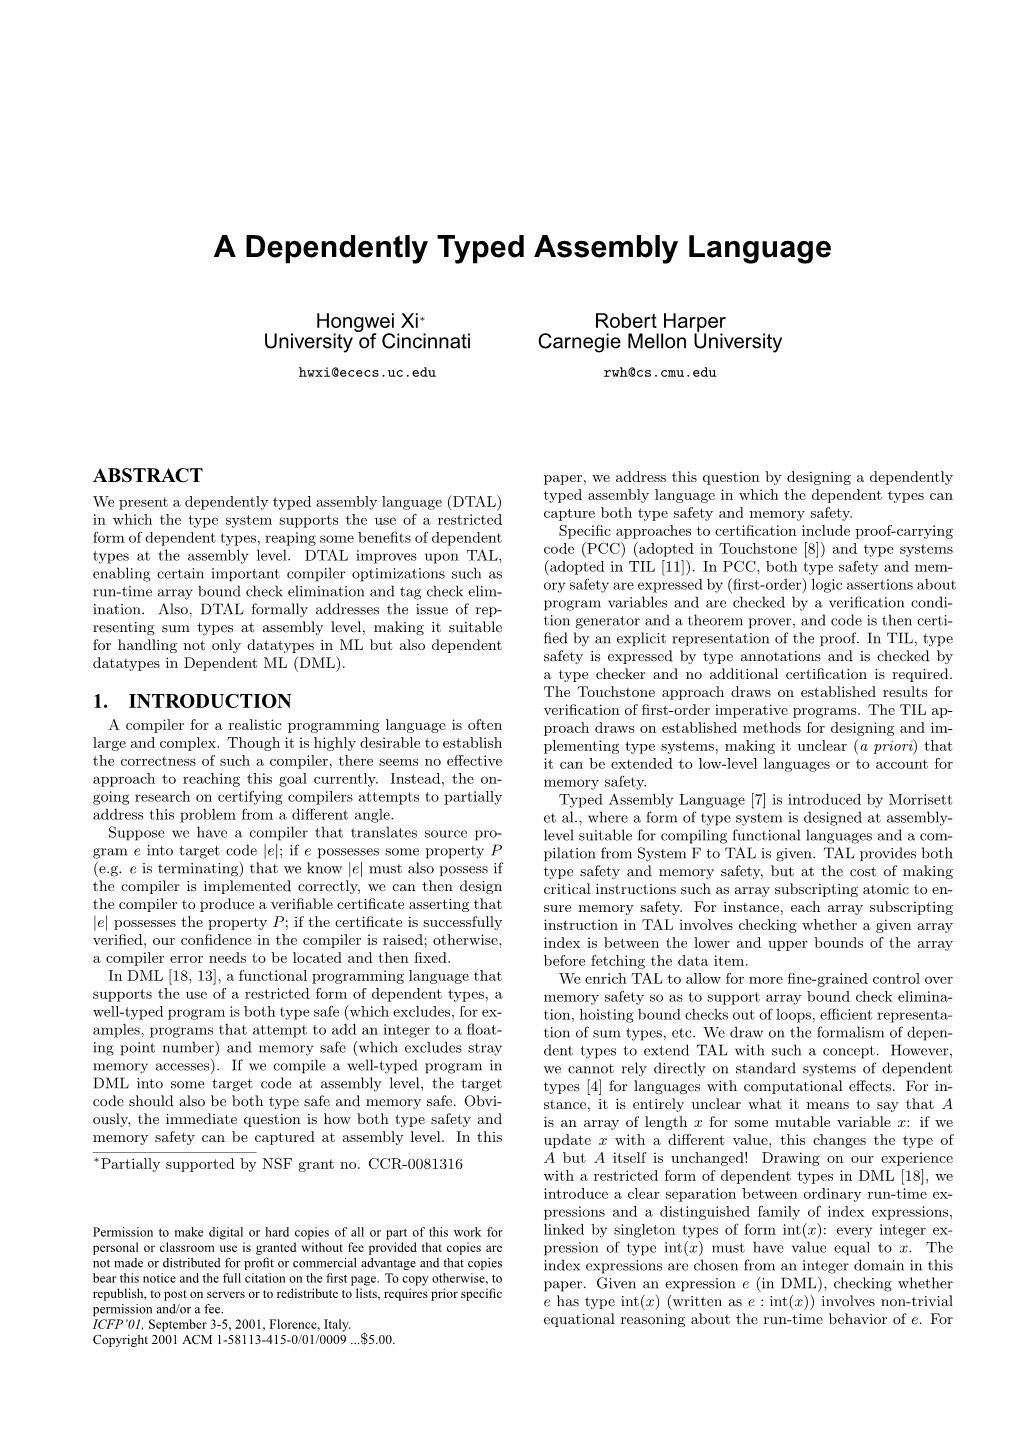 A Dependently Typed Assembly Language